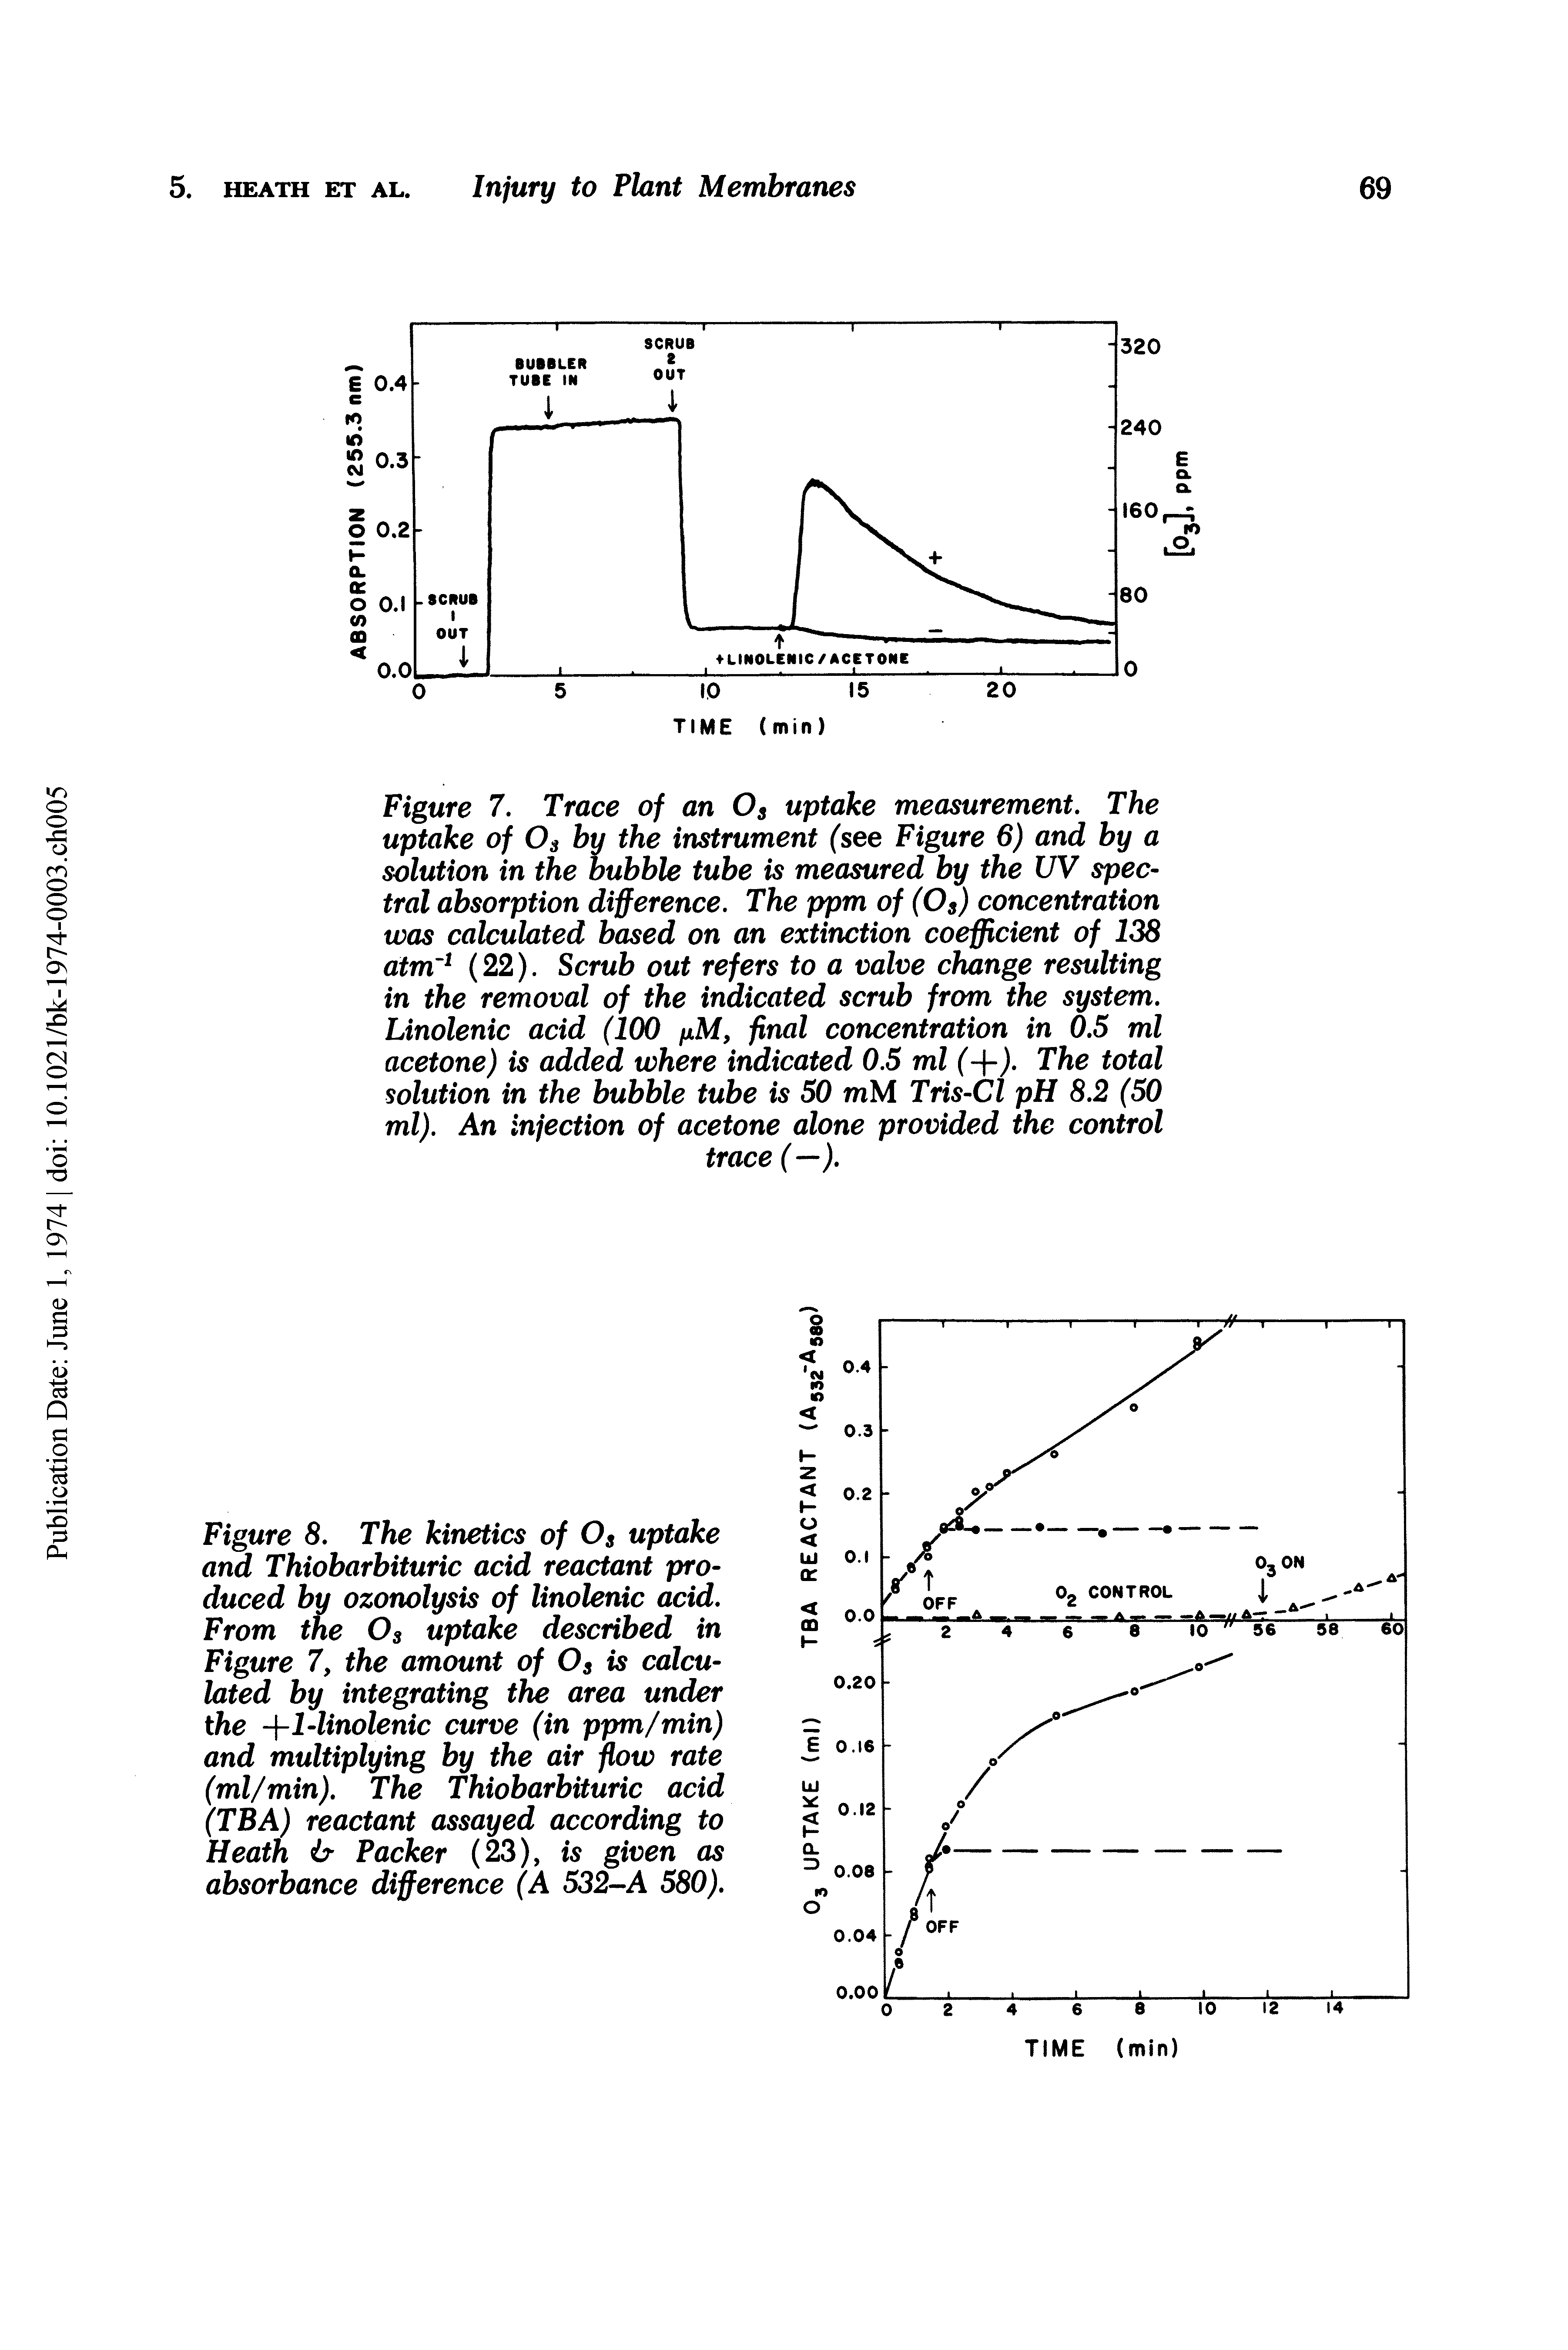 Figure 8. The kinetics of O, uptake ar Thiobarbituric acid reactant produced by ozonolysis of linolenic acid. From the Os uptake described in Figure 7, the amount of Os is calculated by integrating the area under the - -l-linolenic curve (in ppm/min) and multiplying by the air flow rate (ml/min). The Thiobarbituric acid (TEA) reactant assayed according to Heath b- Packer (23), is given as absorbance difference (A 532-A 580).